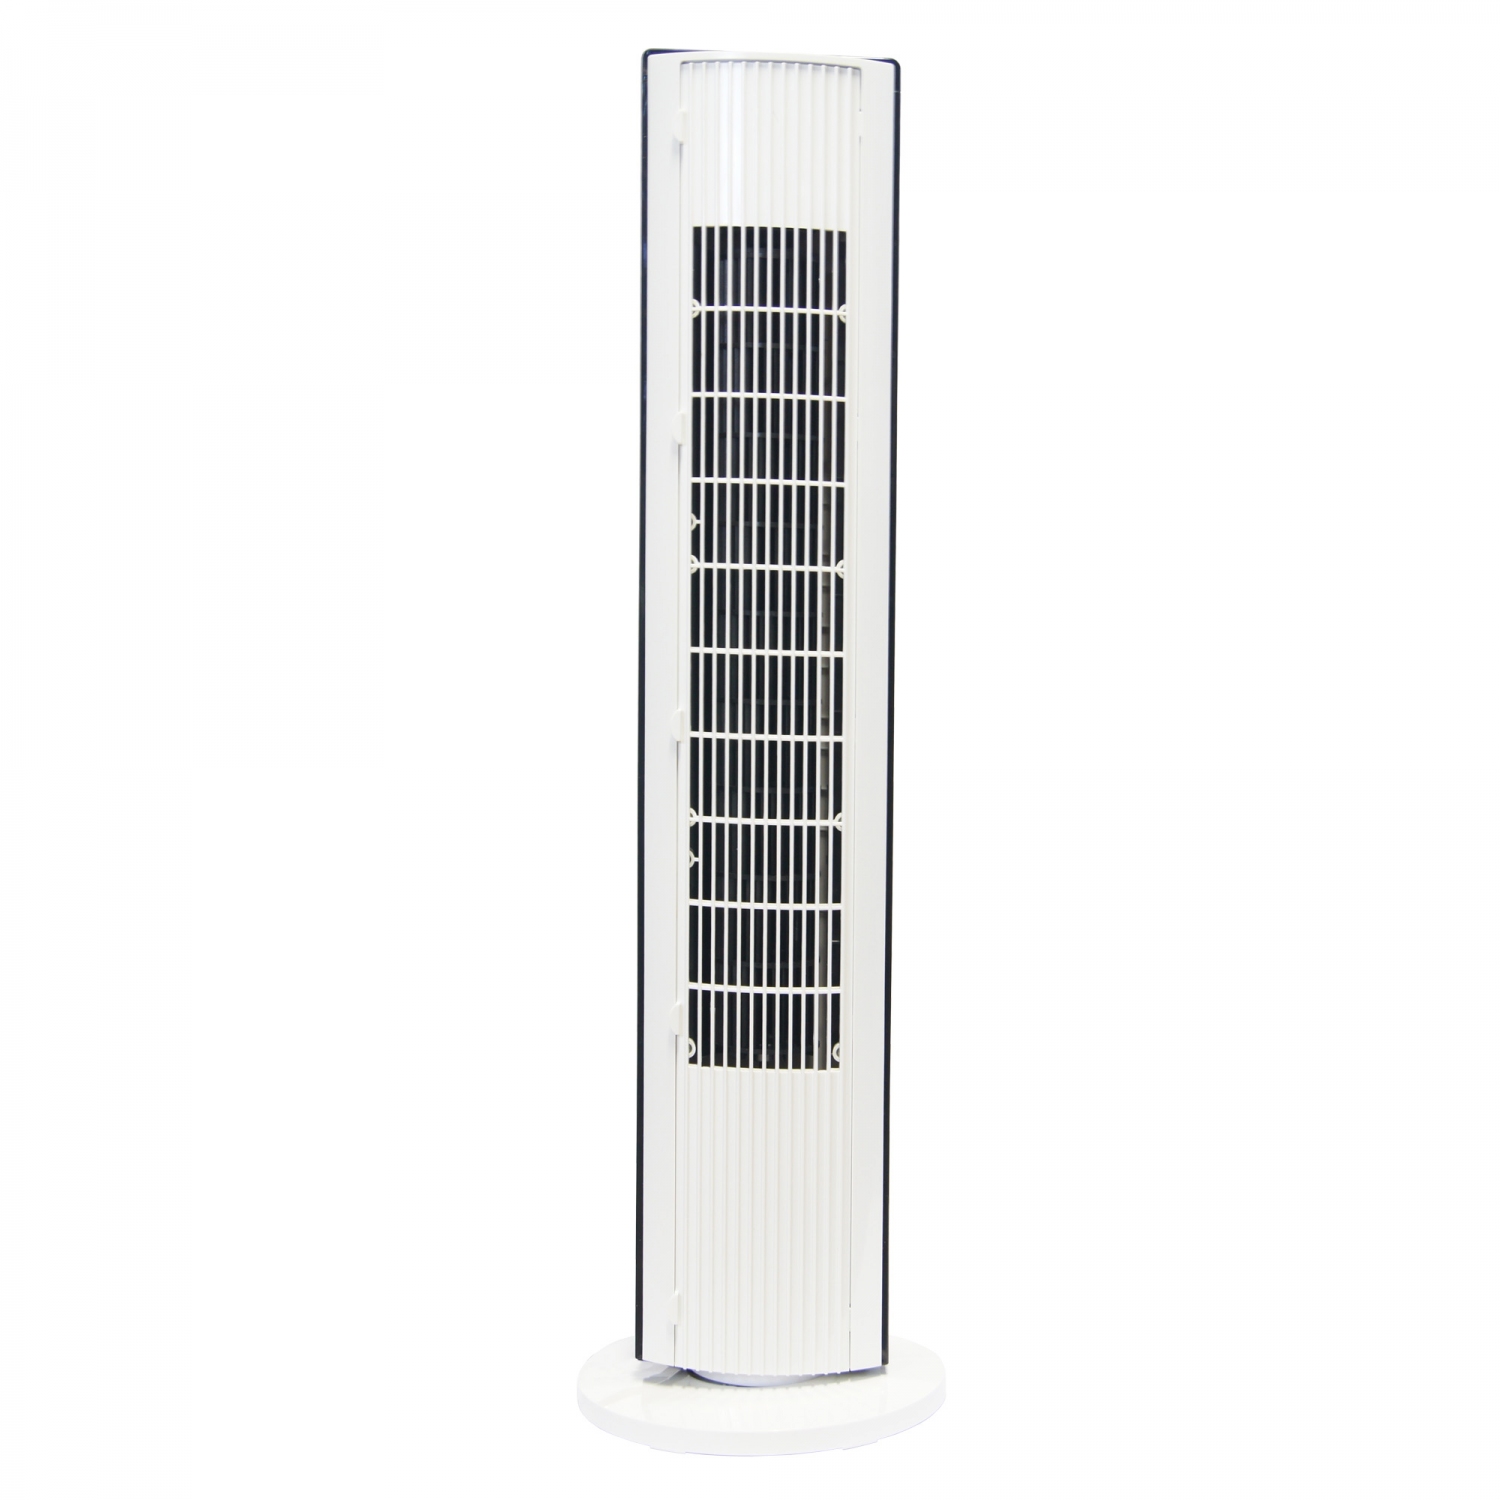 Igenix DF0039 Cooling Tower Fan with DC Motor - White - 4